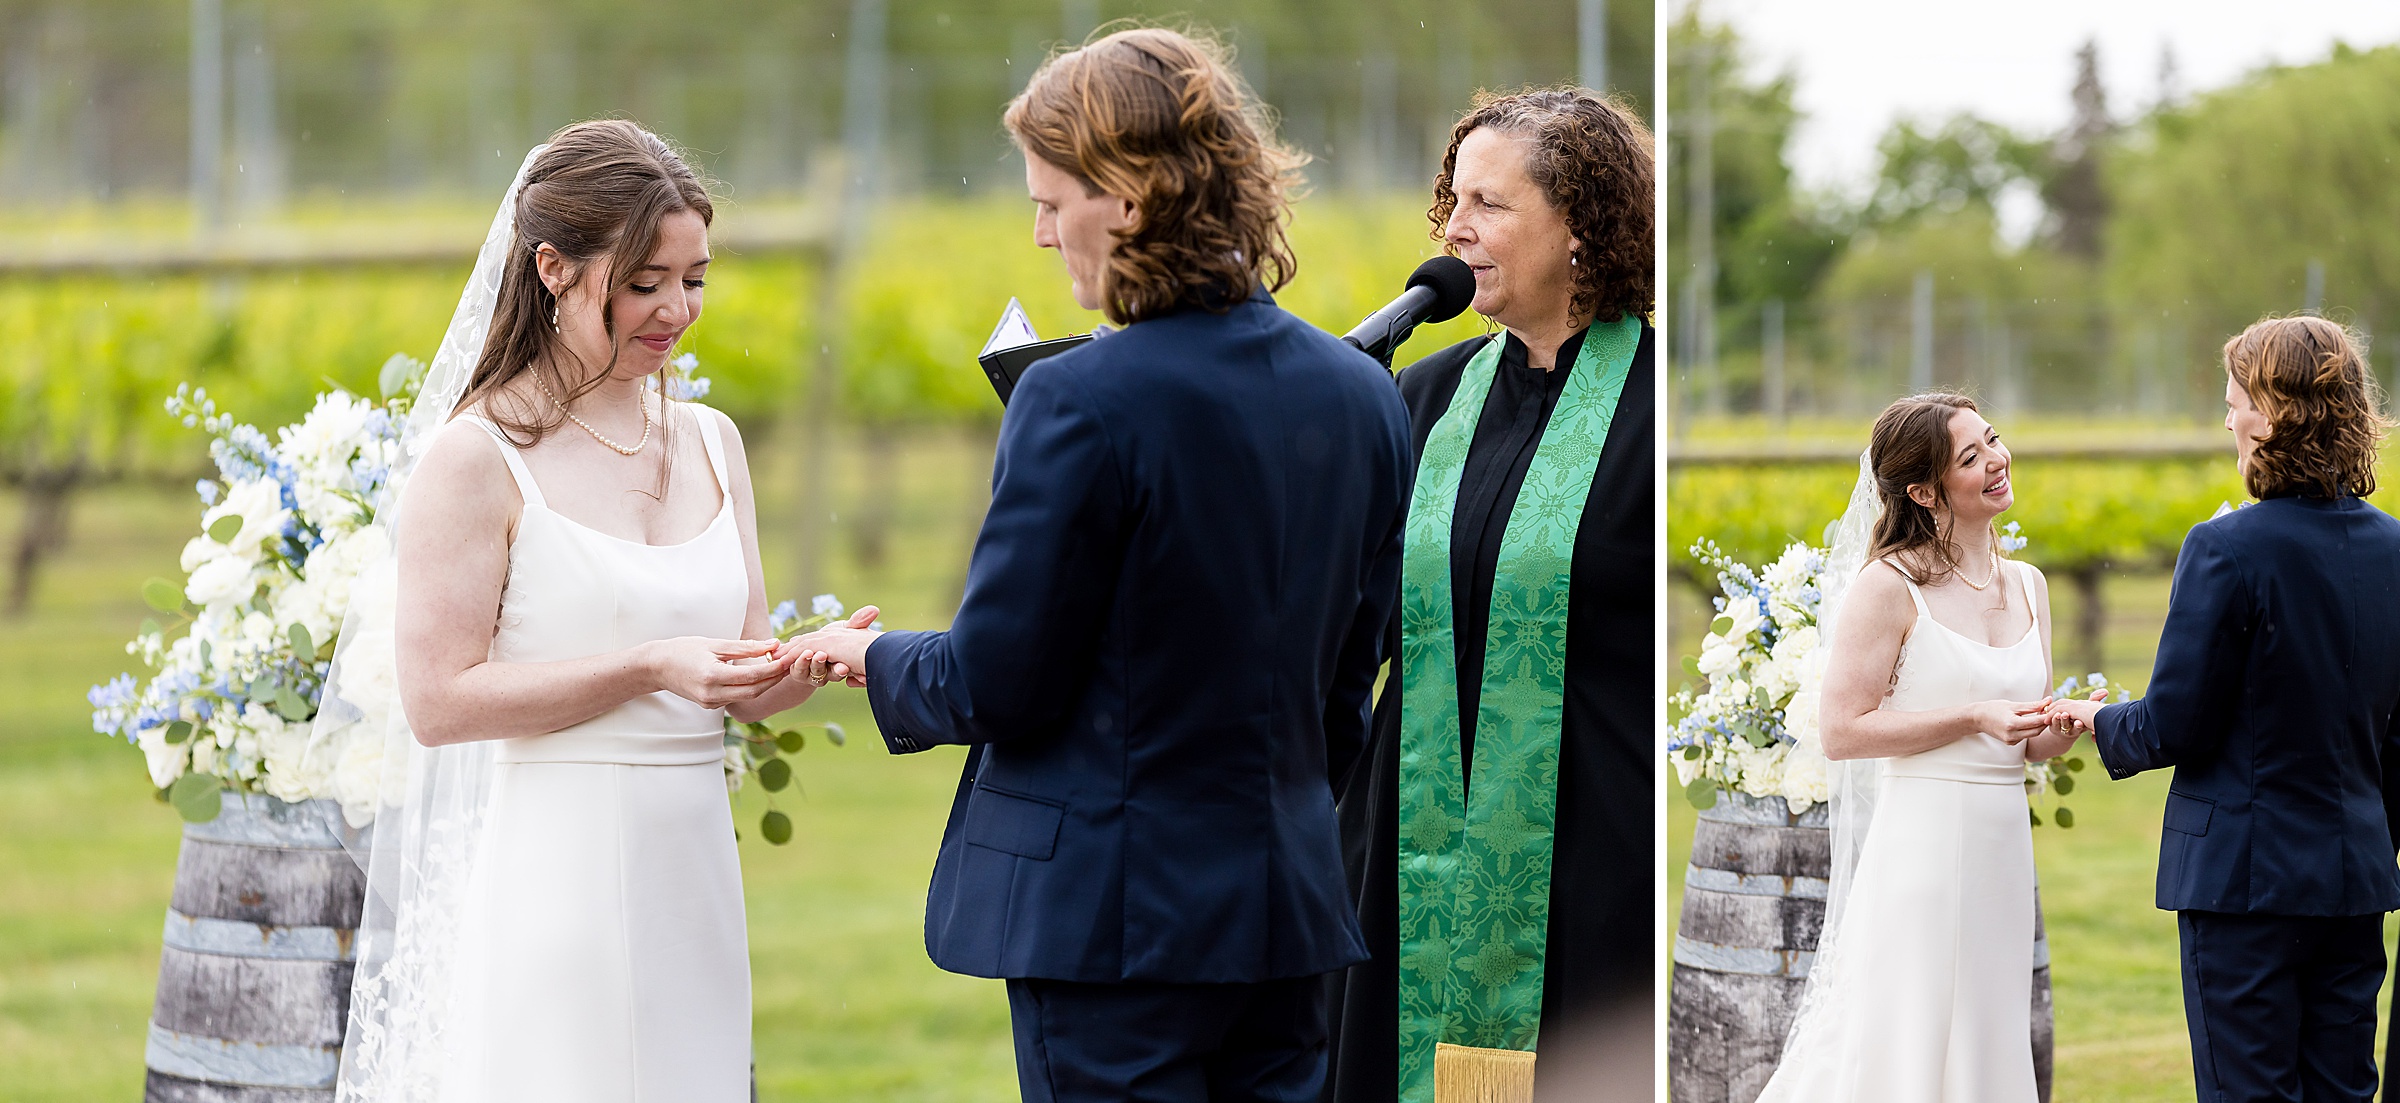 A bride and groom exchange rings during an outdoor wedding ceremony with an officiant standing beside them. The bride and groom smile at each other in front of greenery and floral arrangements.